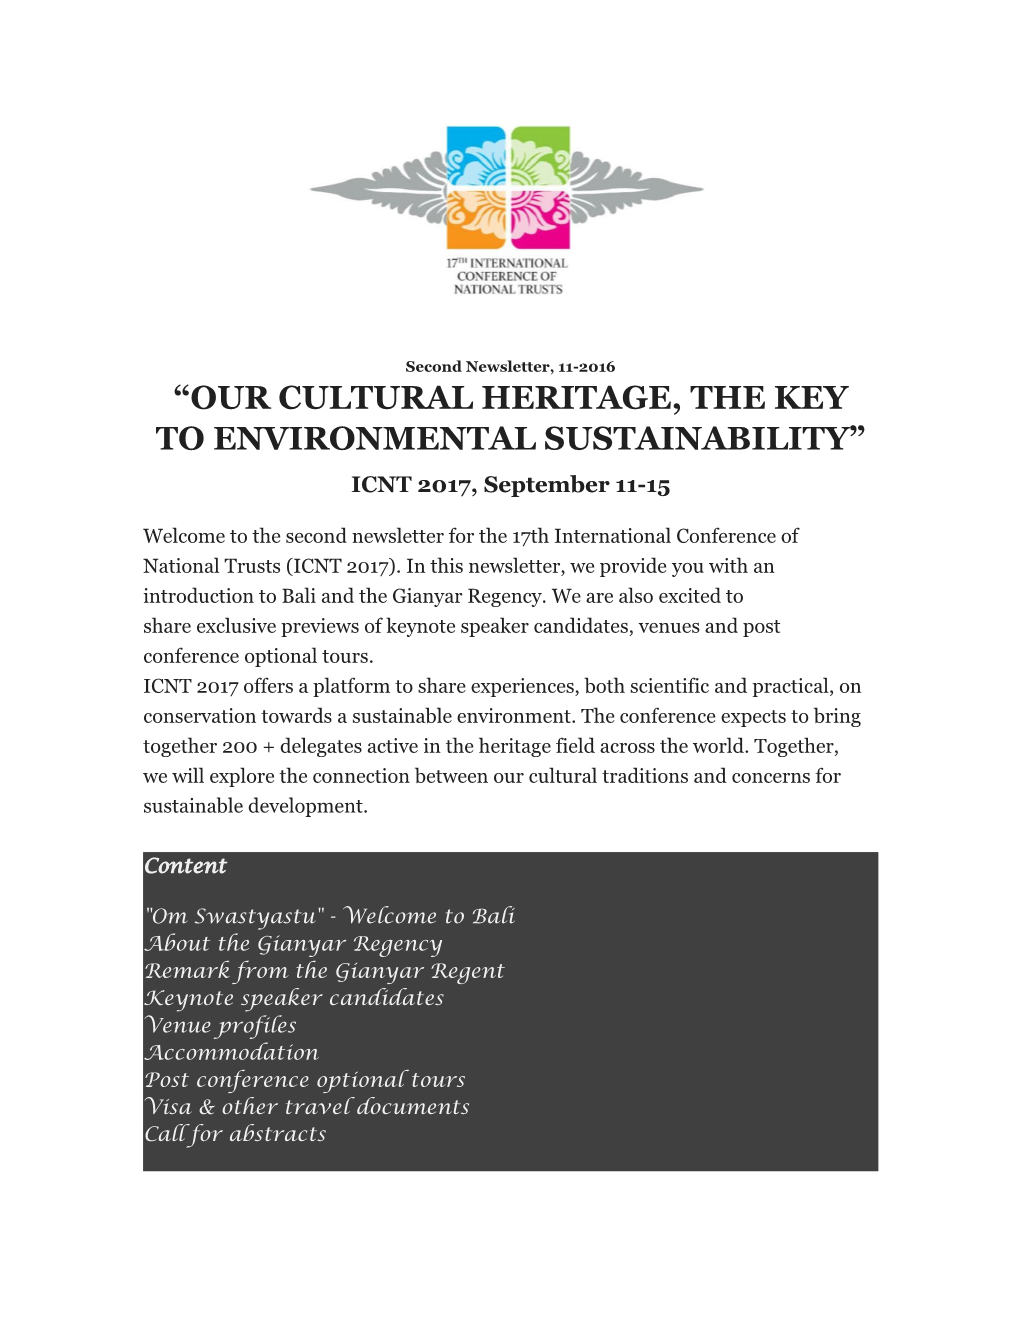 OUR CULTURAL HERITAGE, the KEY to ENVIRONMENTAL SUSTAINABILITY” ICNT 2017, September 11-15